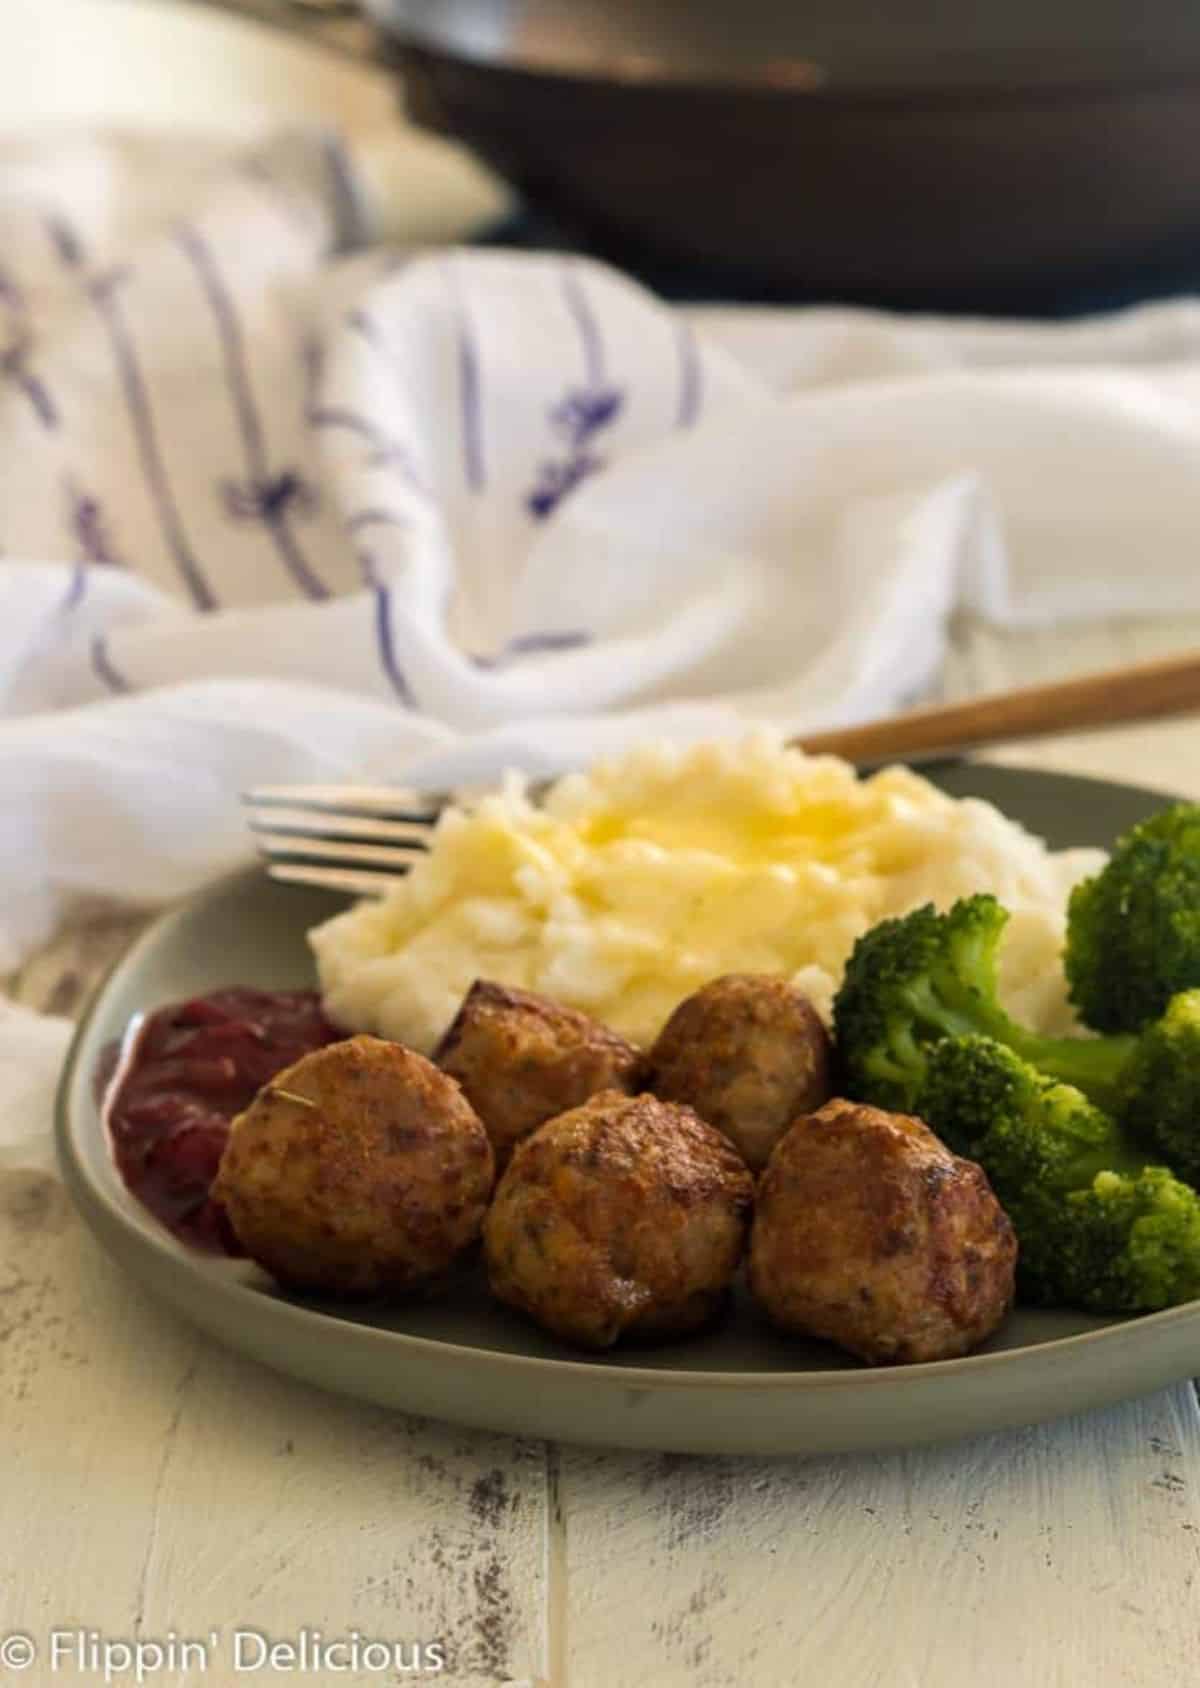 Flavorful Gluten-Free Meatballs with mashed potatoes and broccoli on a gray plate.